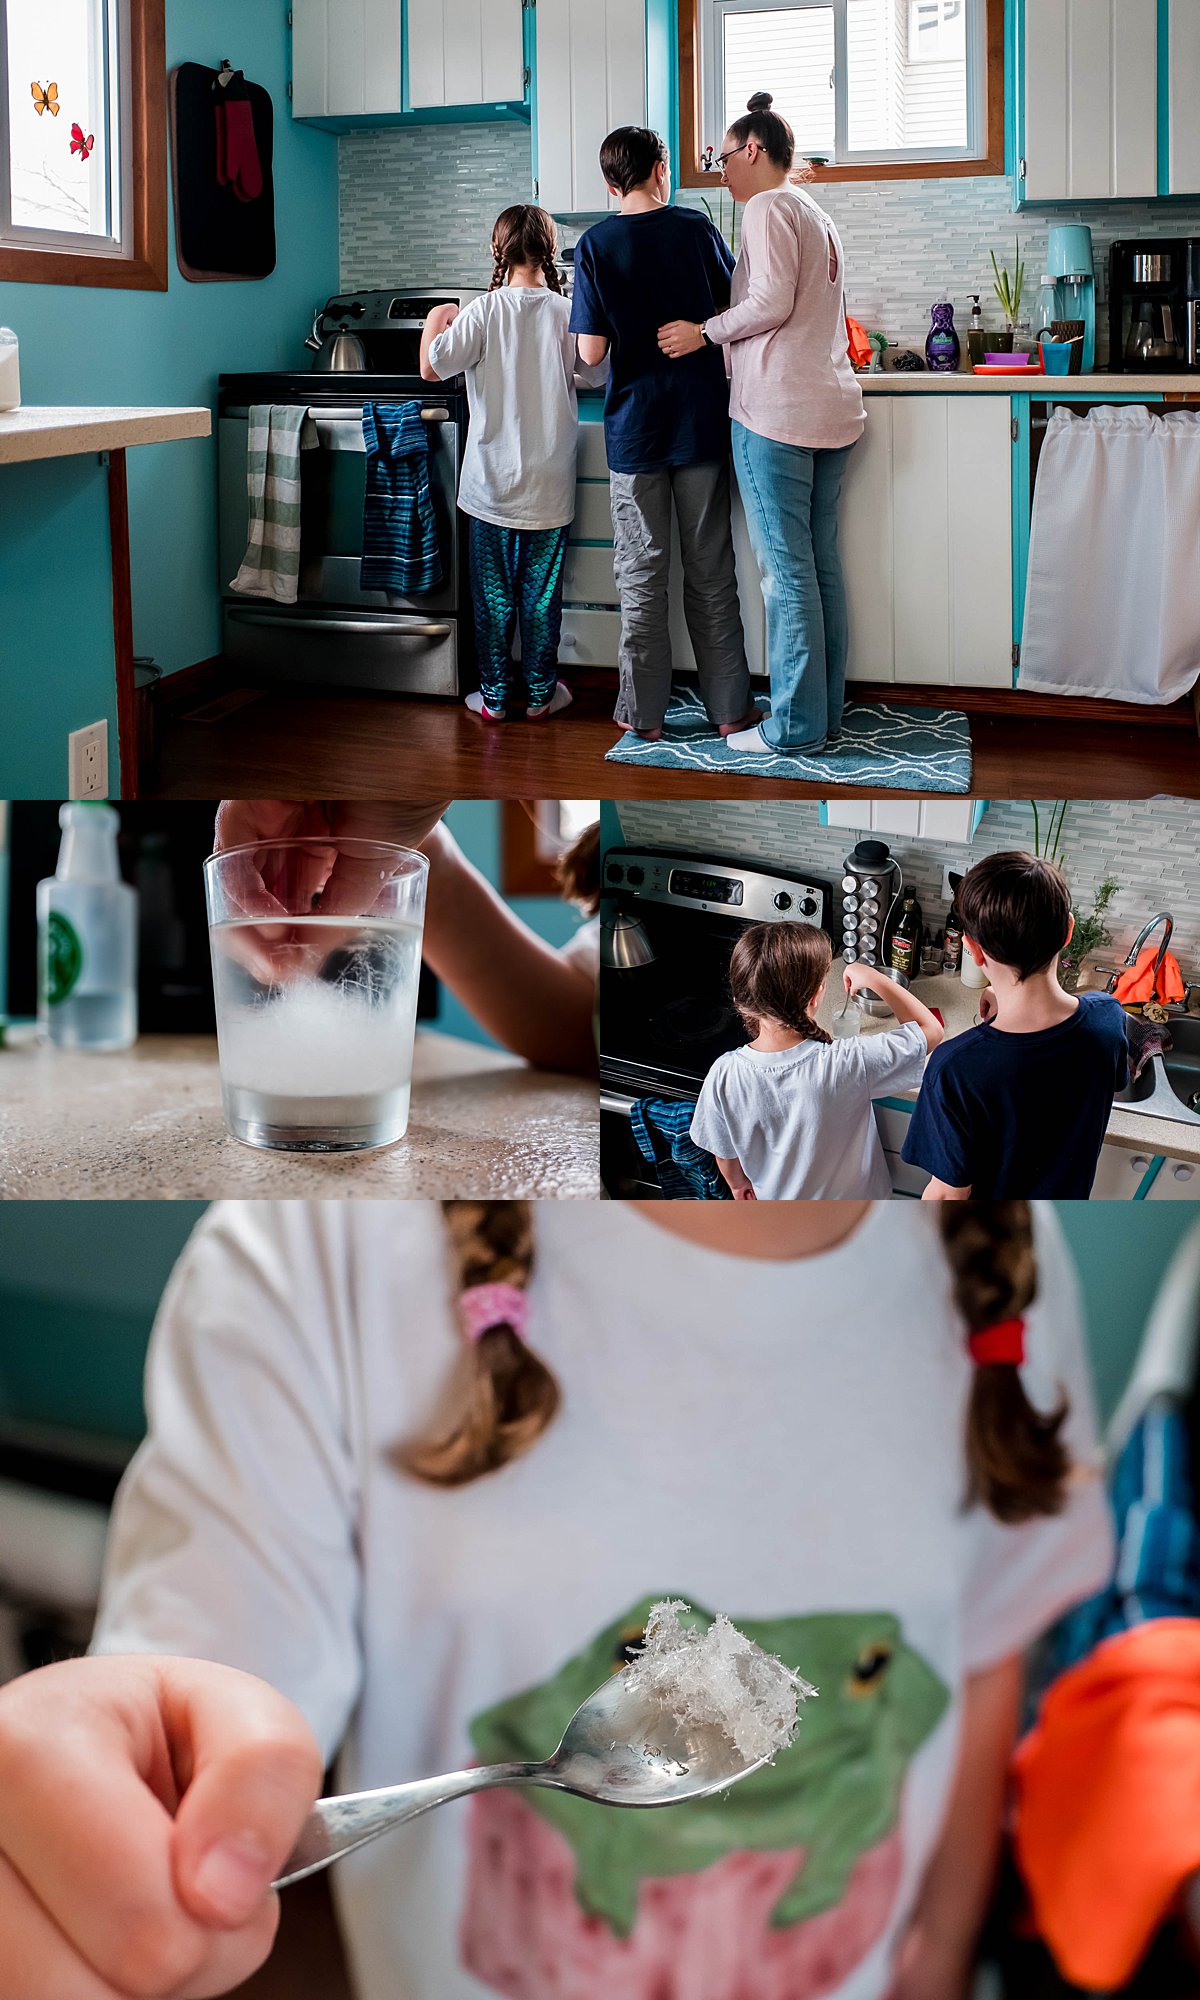 things to do with the kids Crystal science experiment.jpg